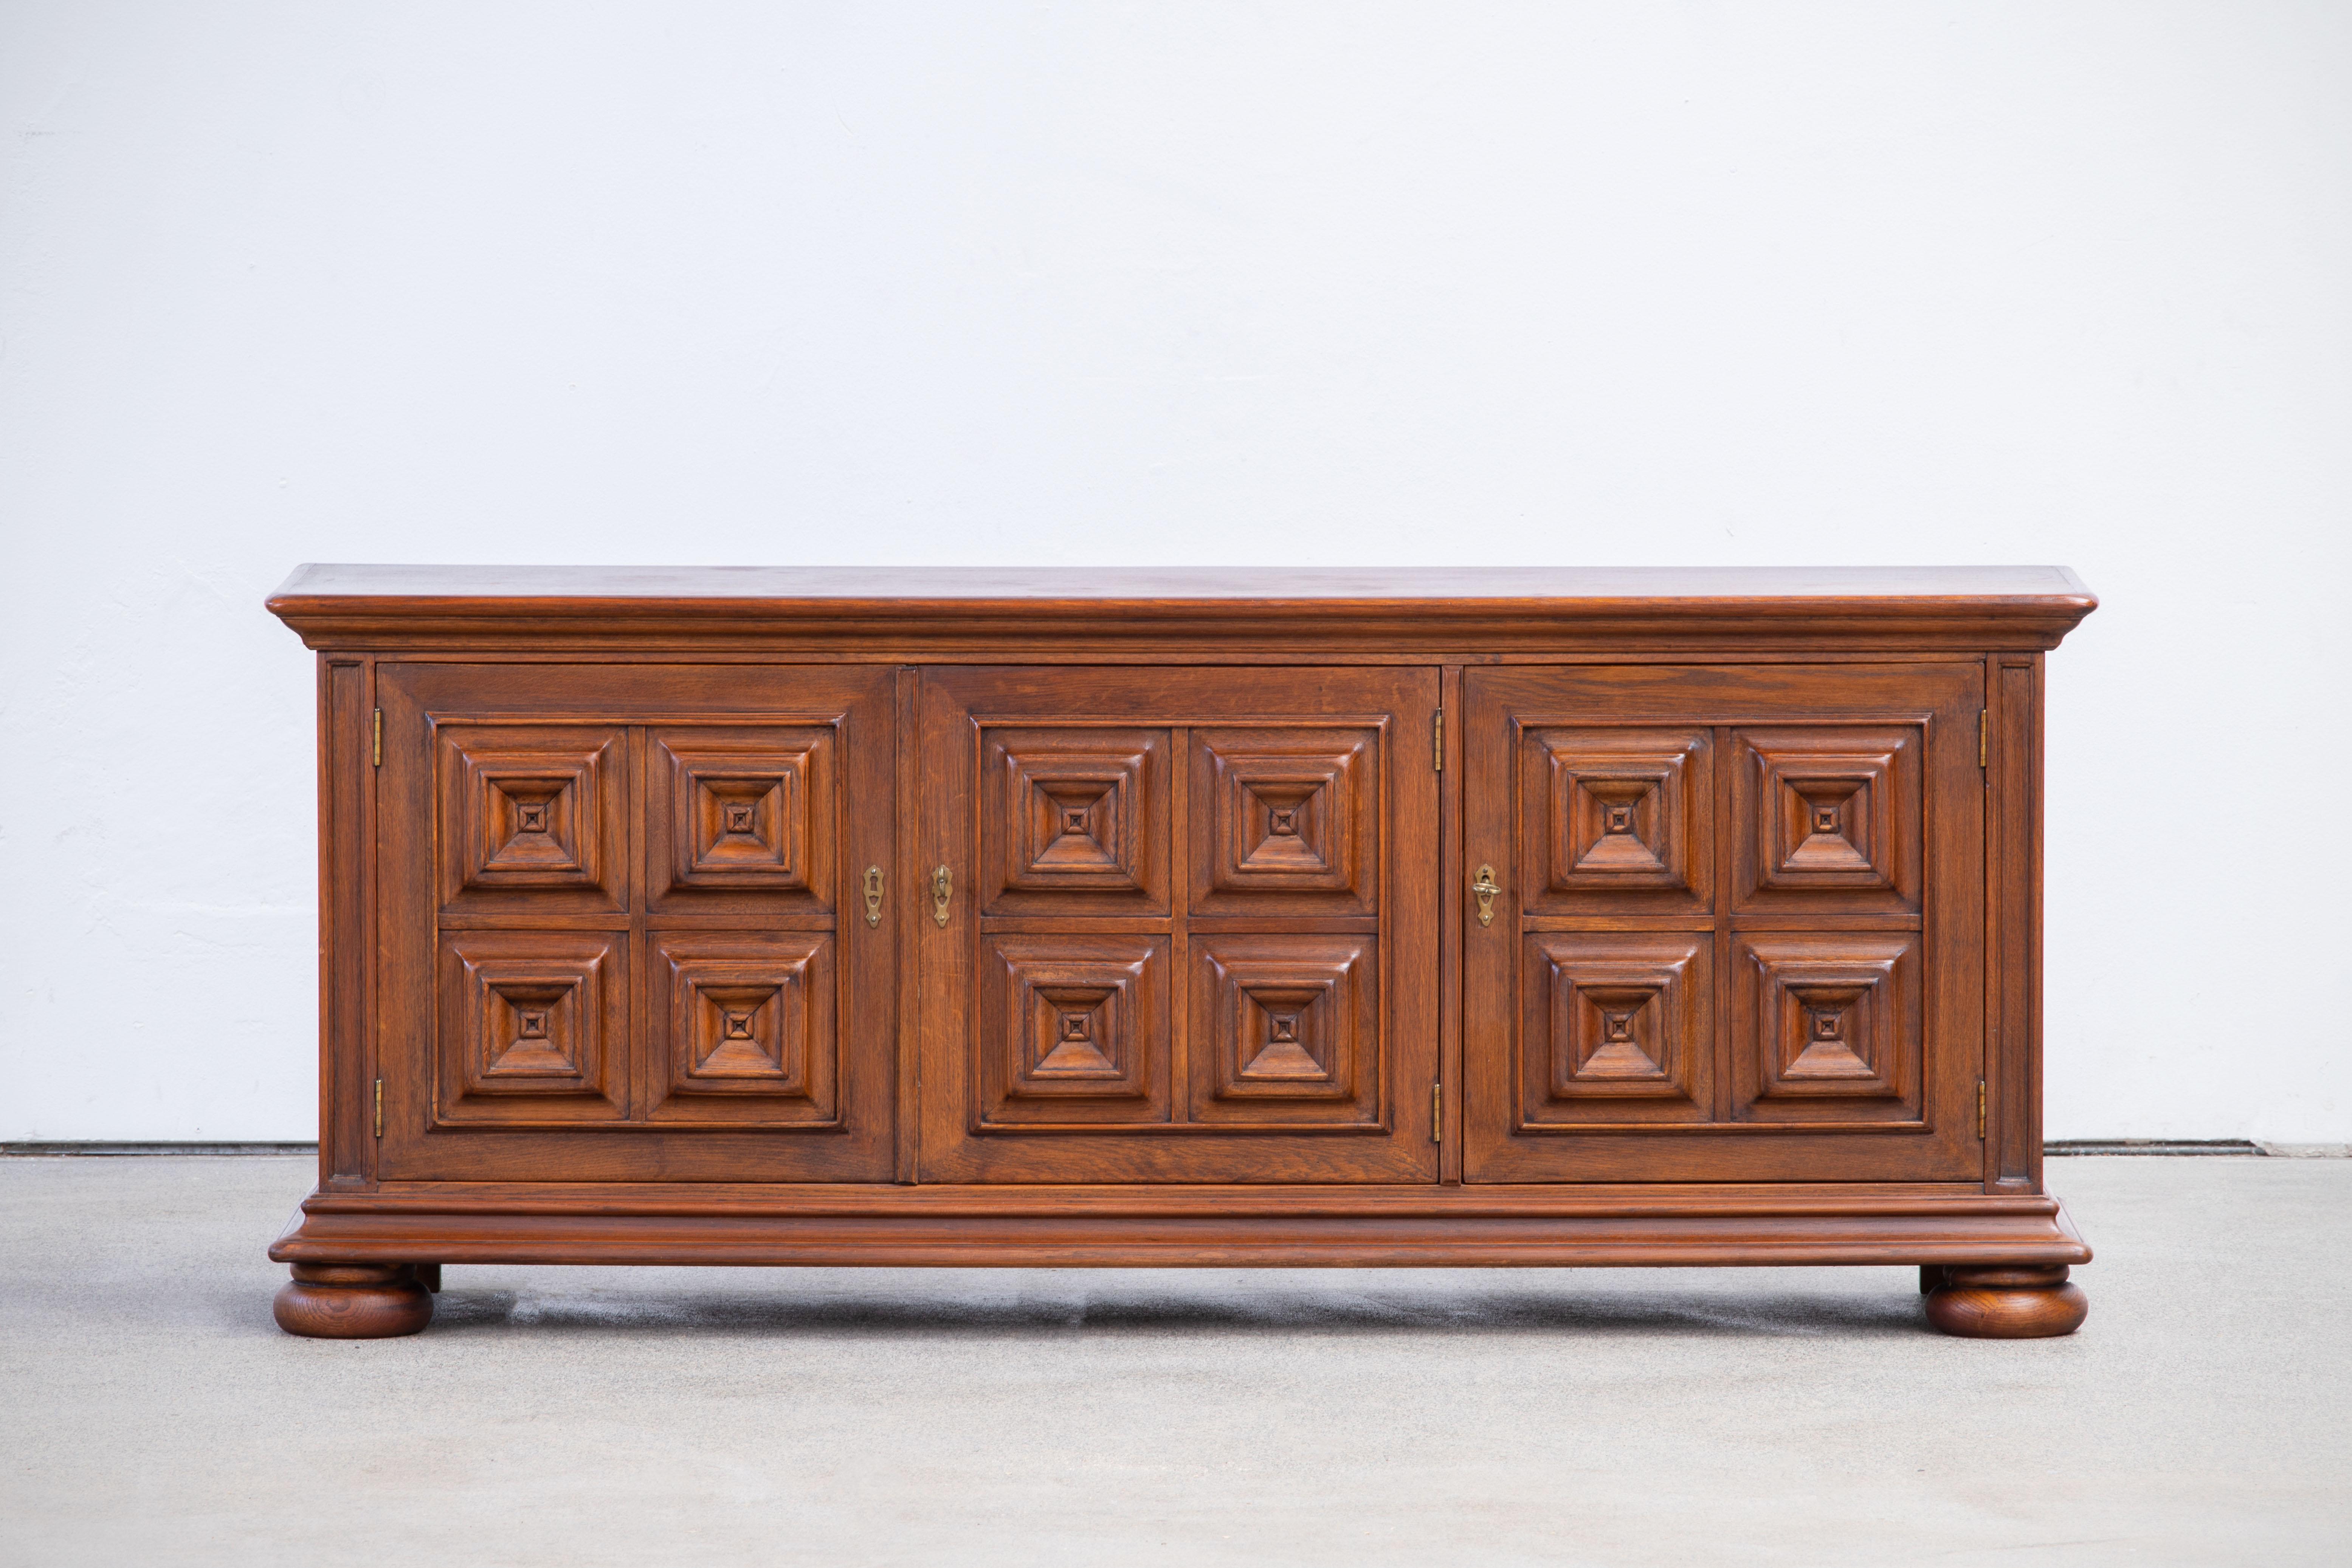 Brutalist solid oak sideboard, credenza, Spanish Colonial. The buffet features stunning Oak structure on door panels. It offers ample storage, with shelve behind the doors. A unique blend of Art Deco Spanish and Brutalist Modern design. The